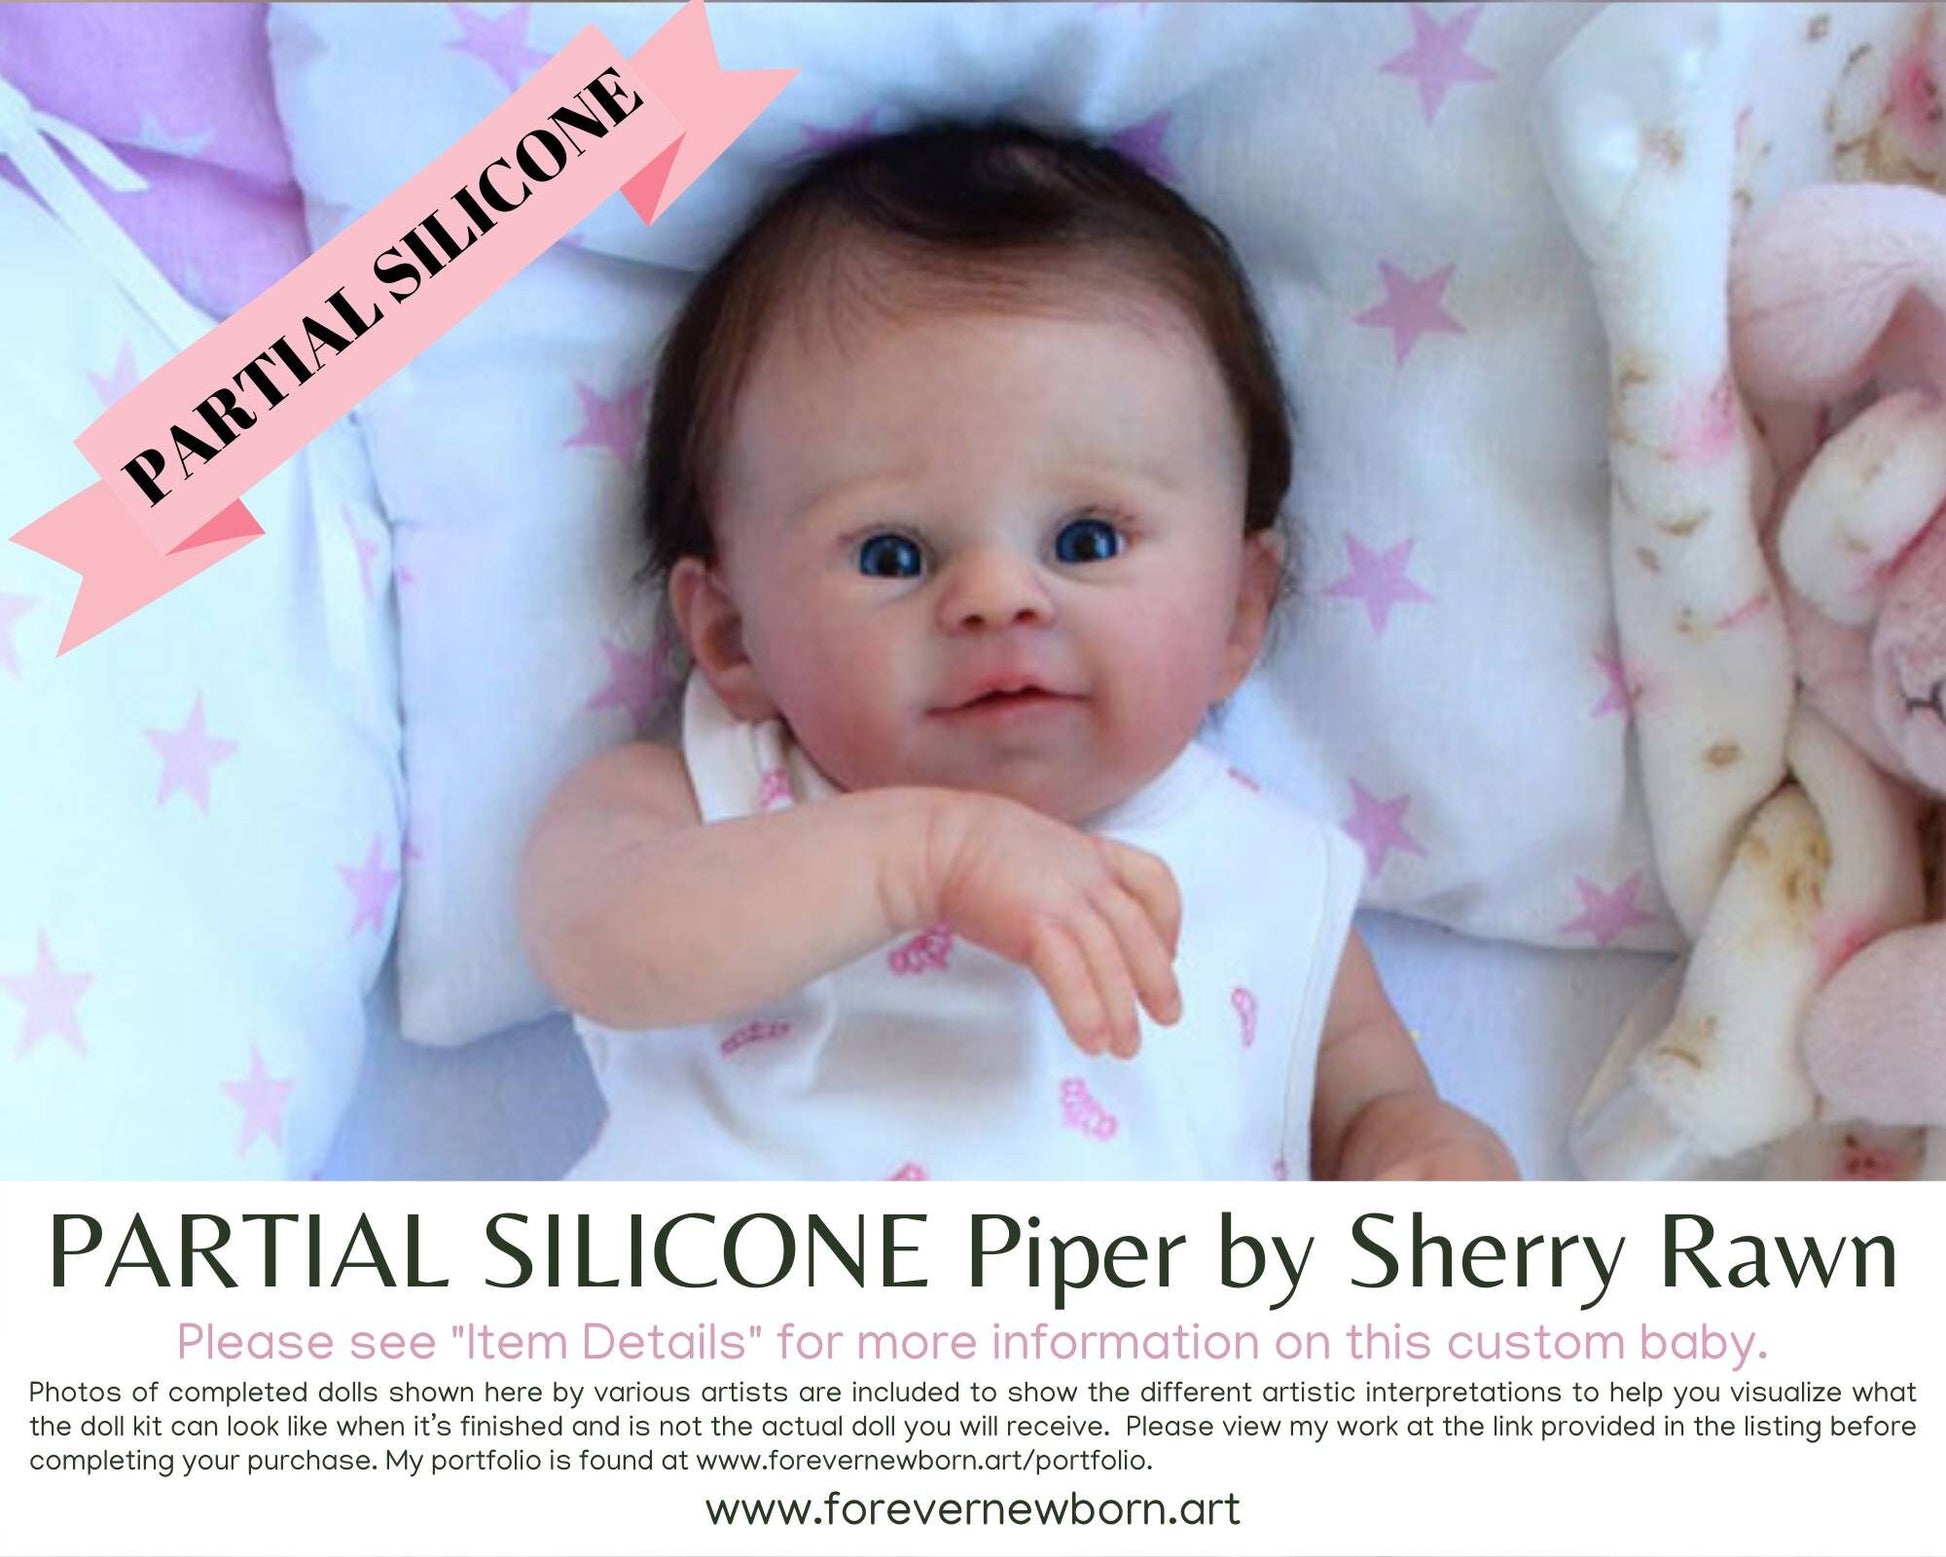 SiLiCoNe BaBy Piper by Sherry Rawn (18"+ Full Limbs) with cloth body. Extended Processing Time May Be Required. ASK FIRST!